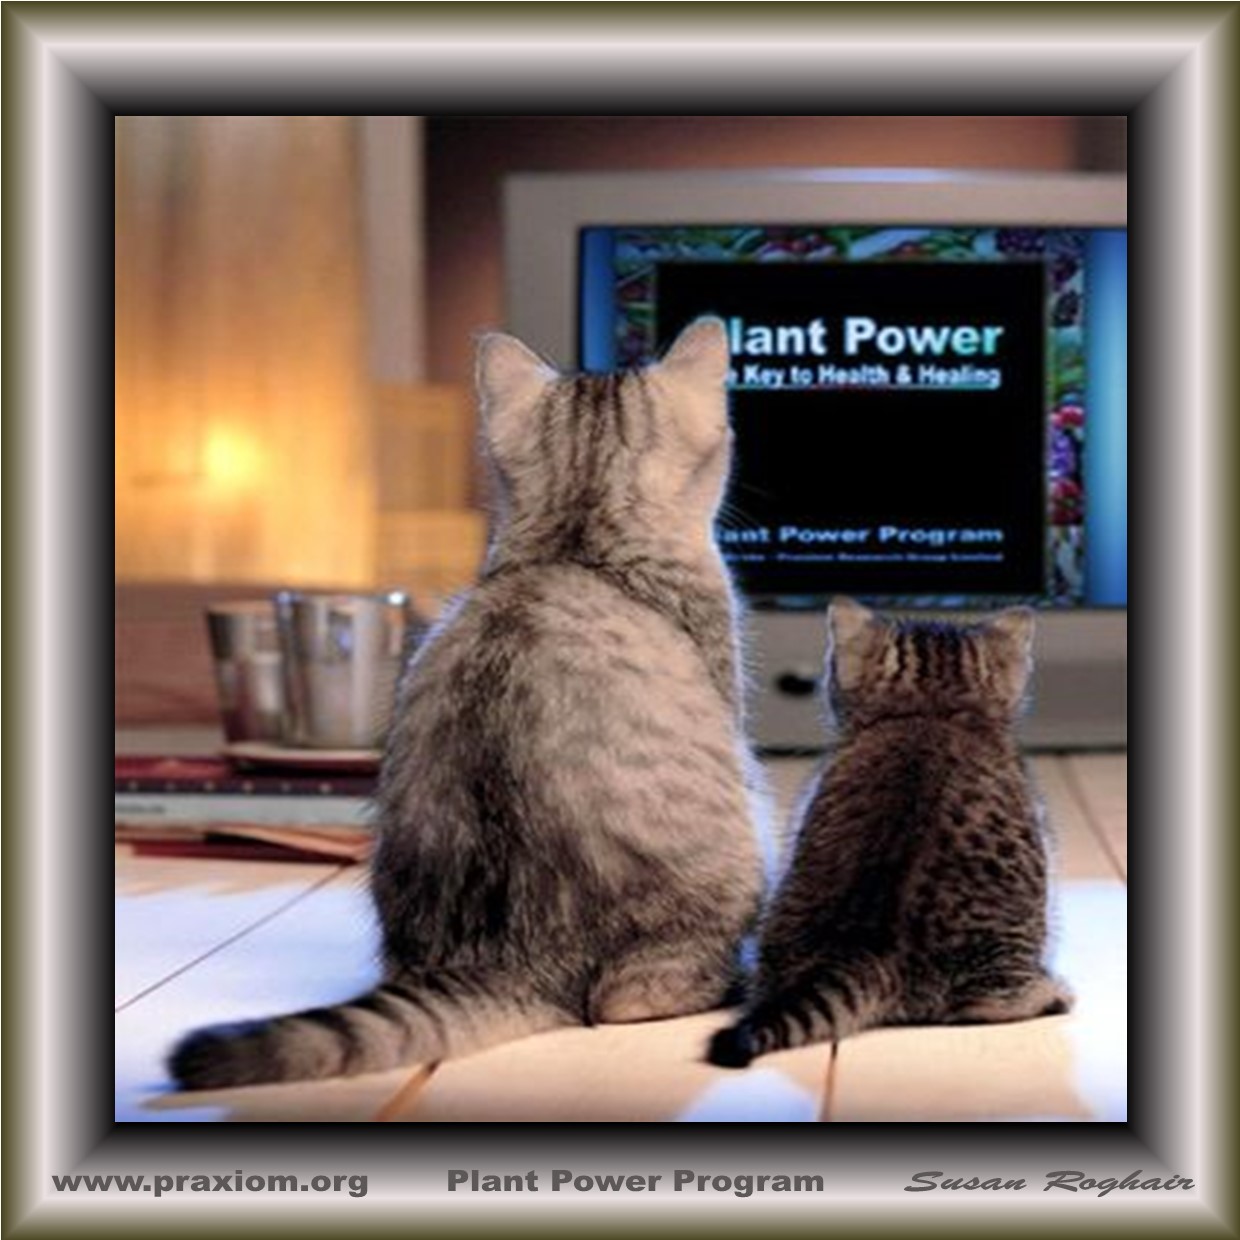 Plant Power Product on TV Screen